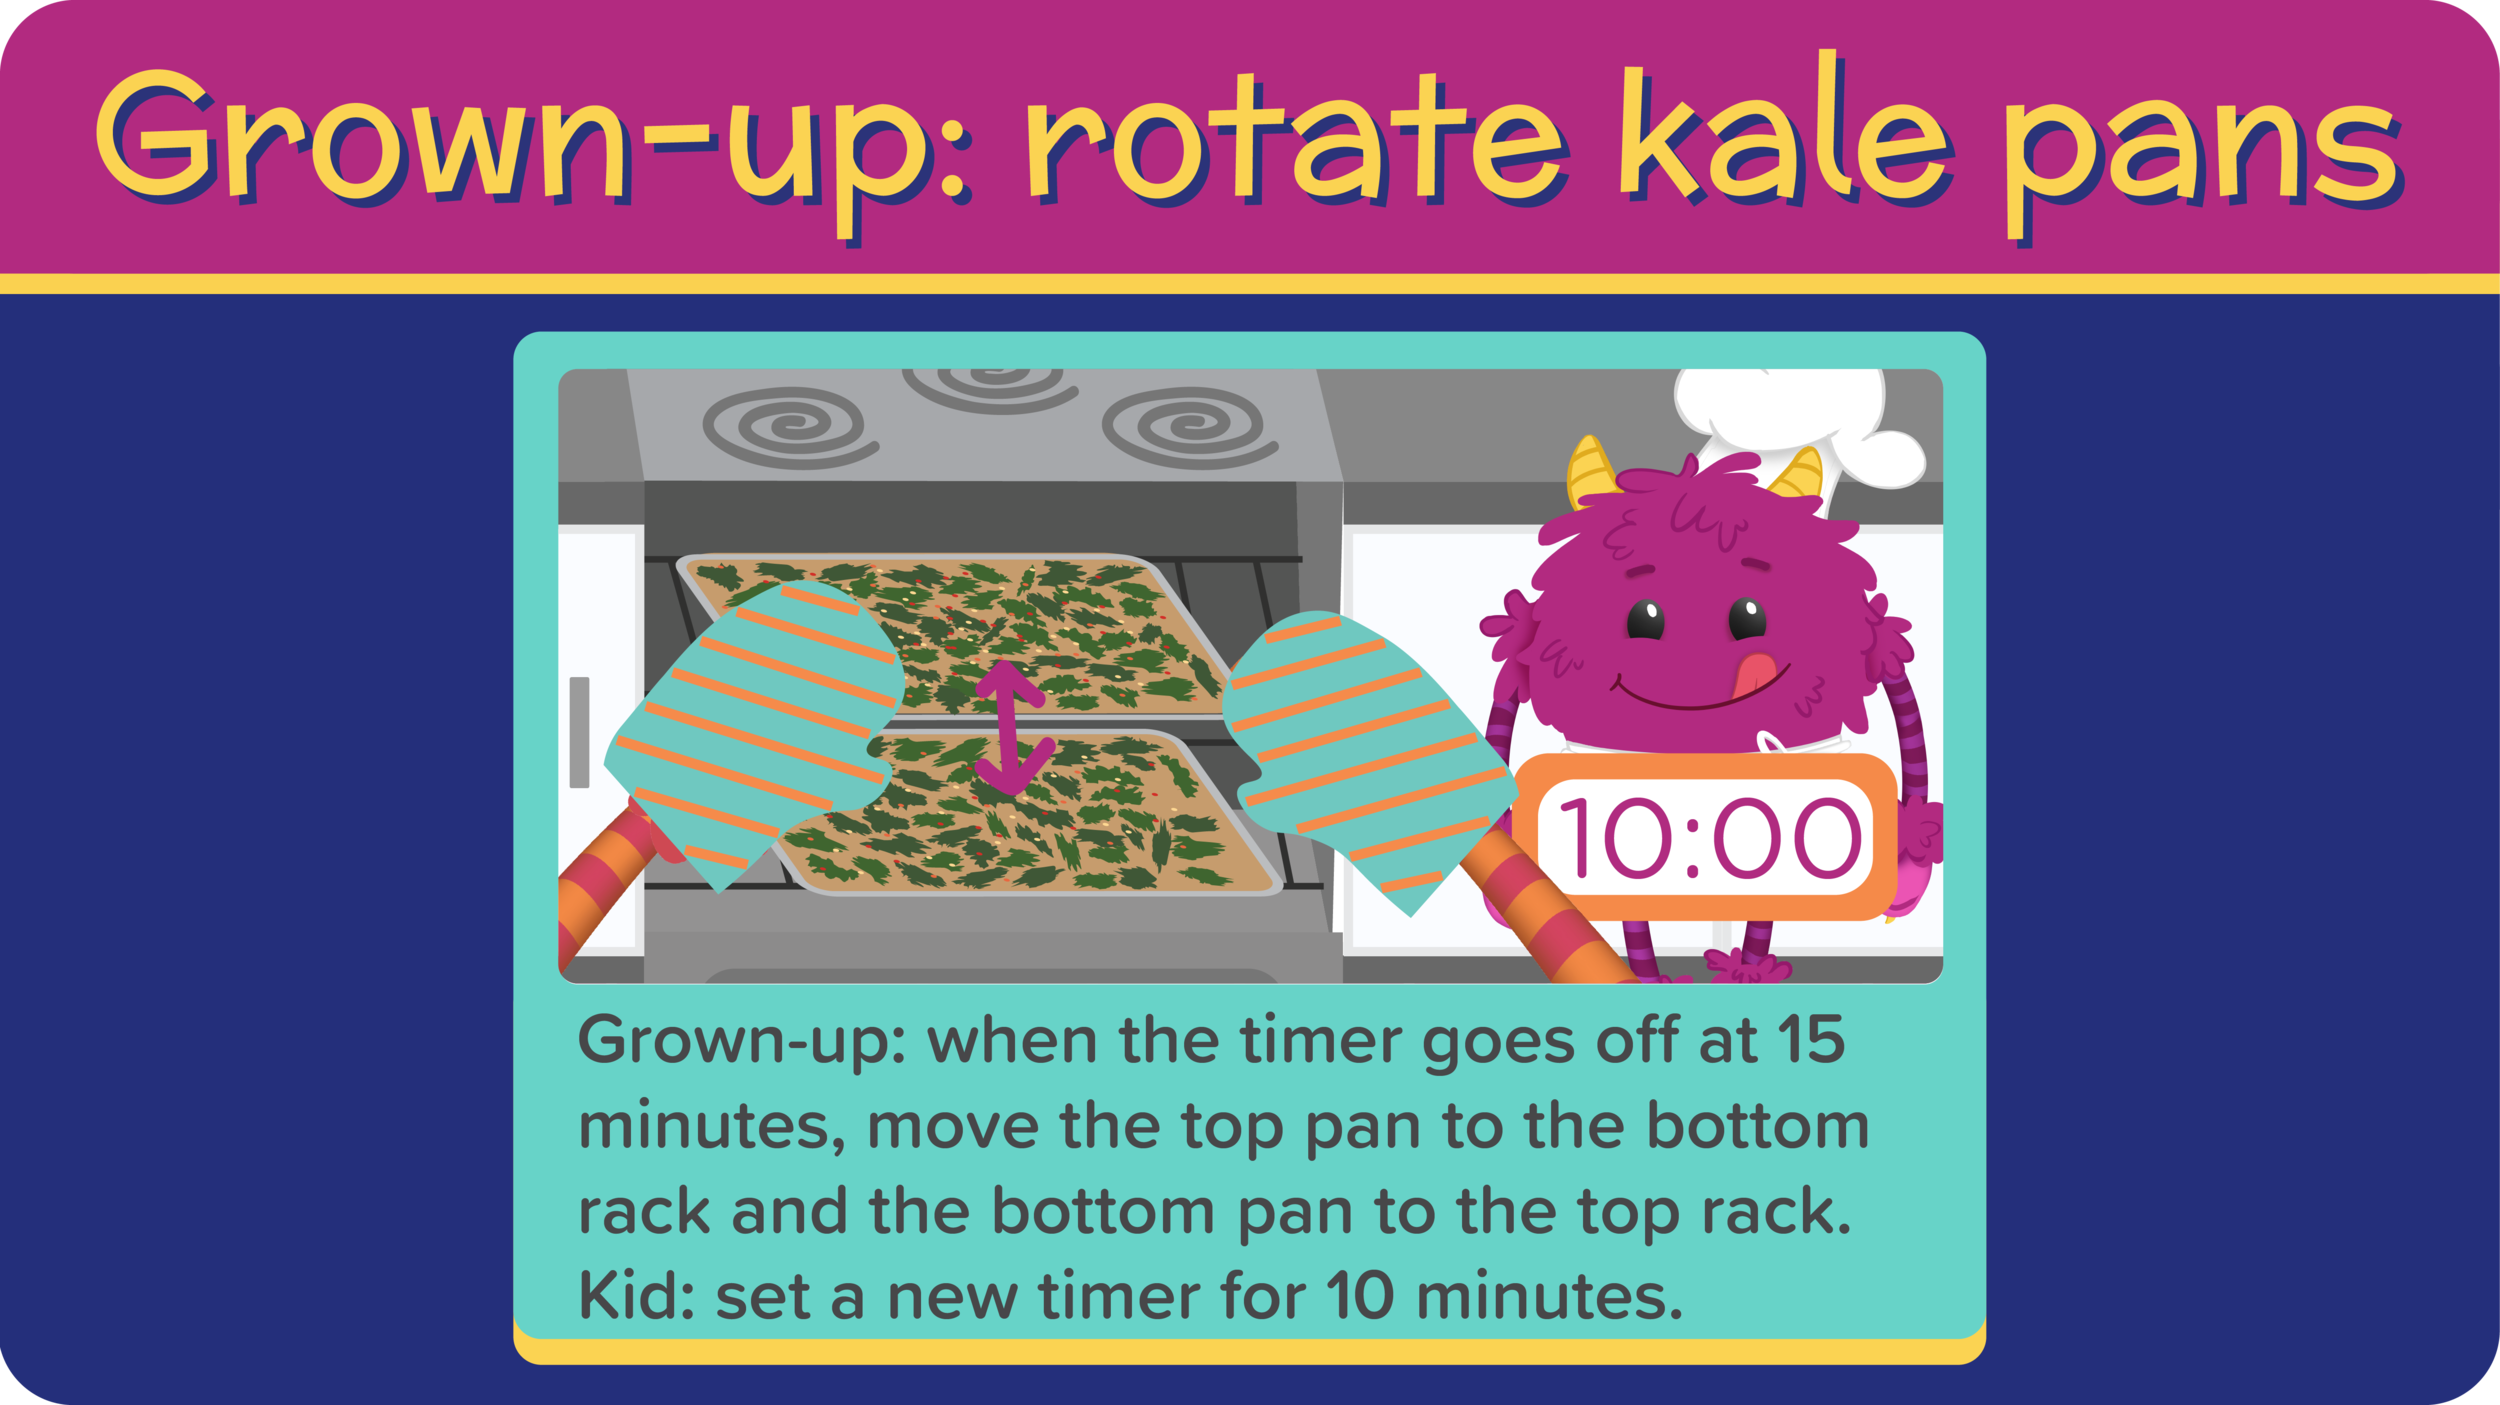 26_SpicyTacoKaleChips_Rotate kale pans-01.png